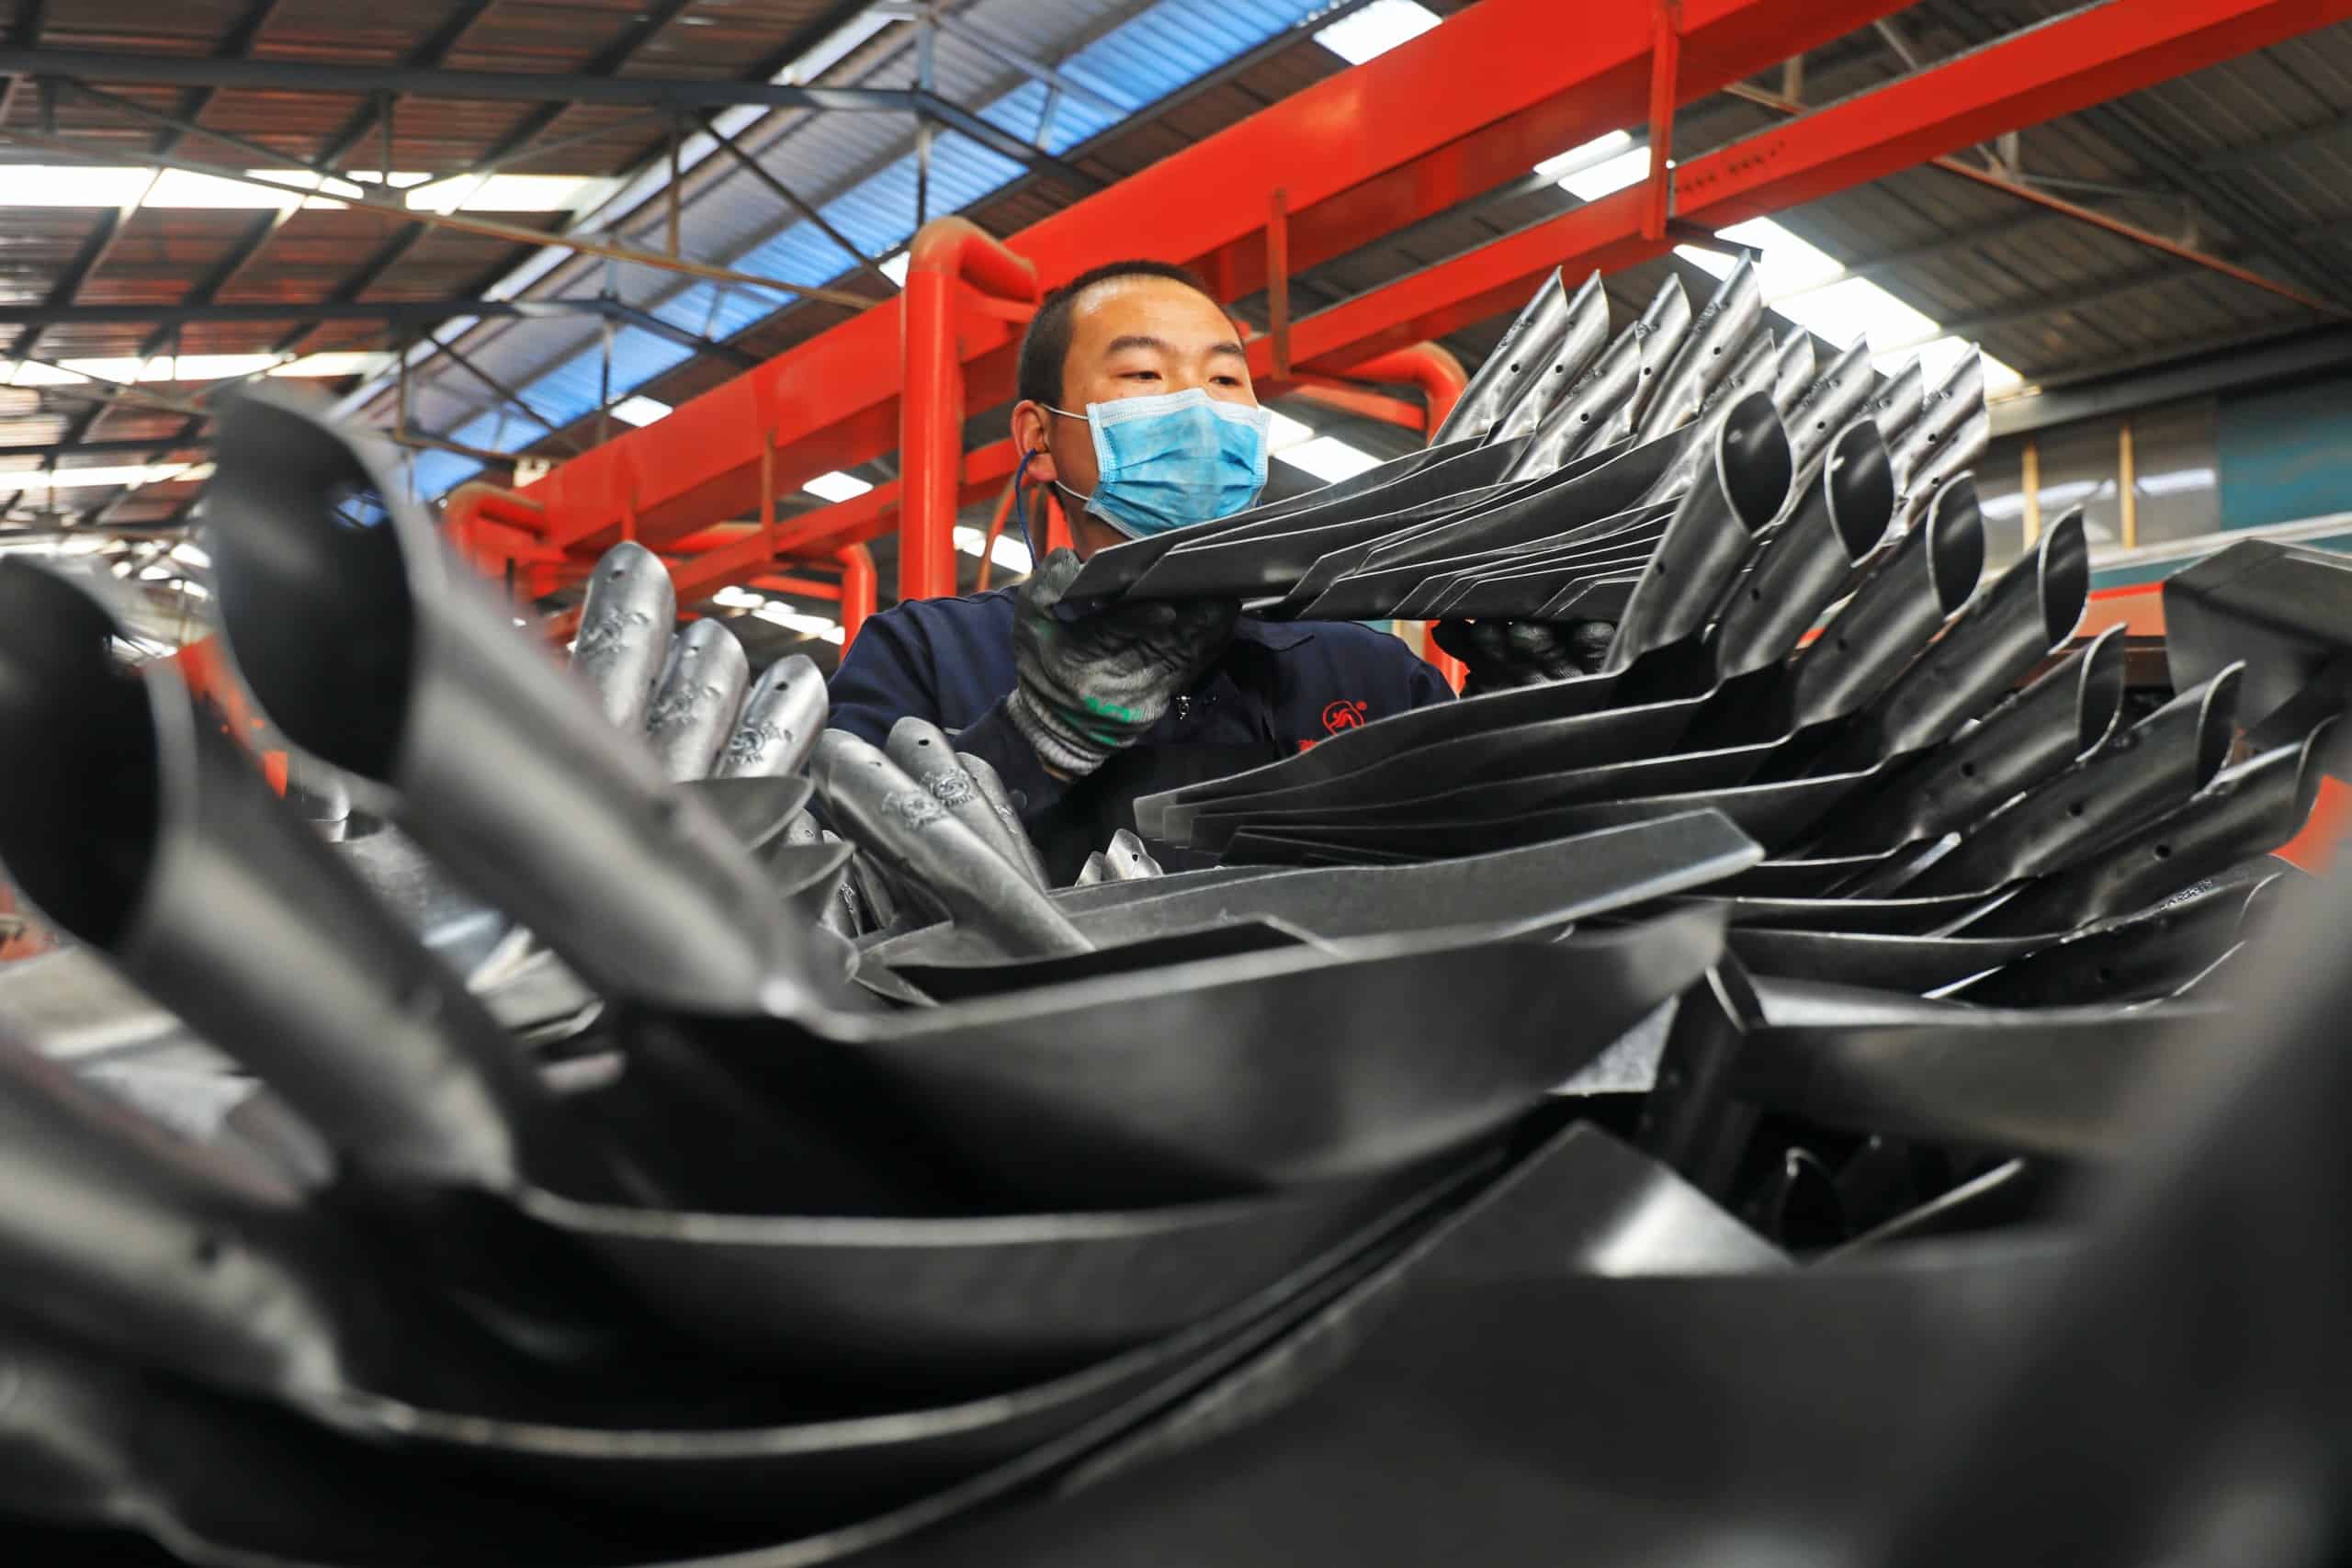 Workers on the production line in Hebei Province, China.